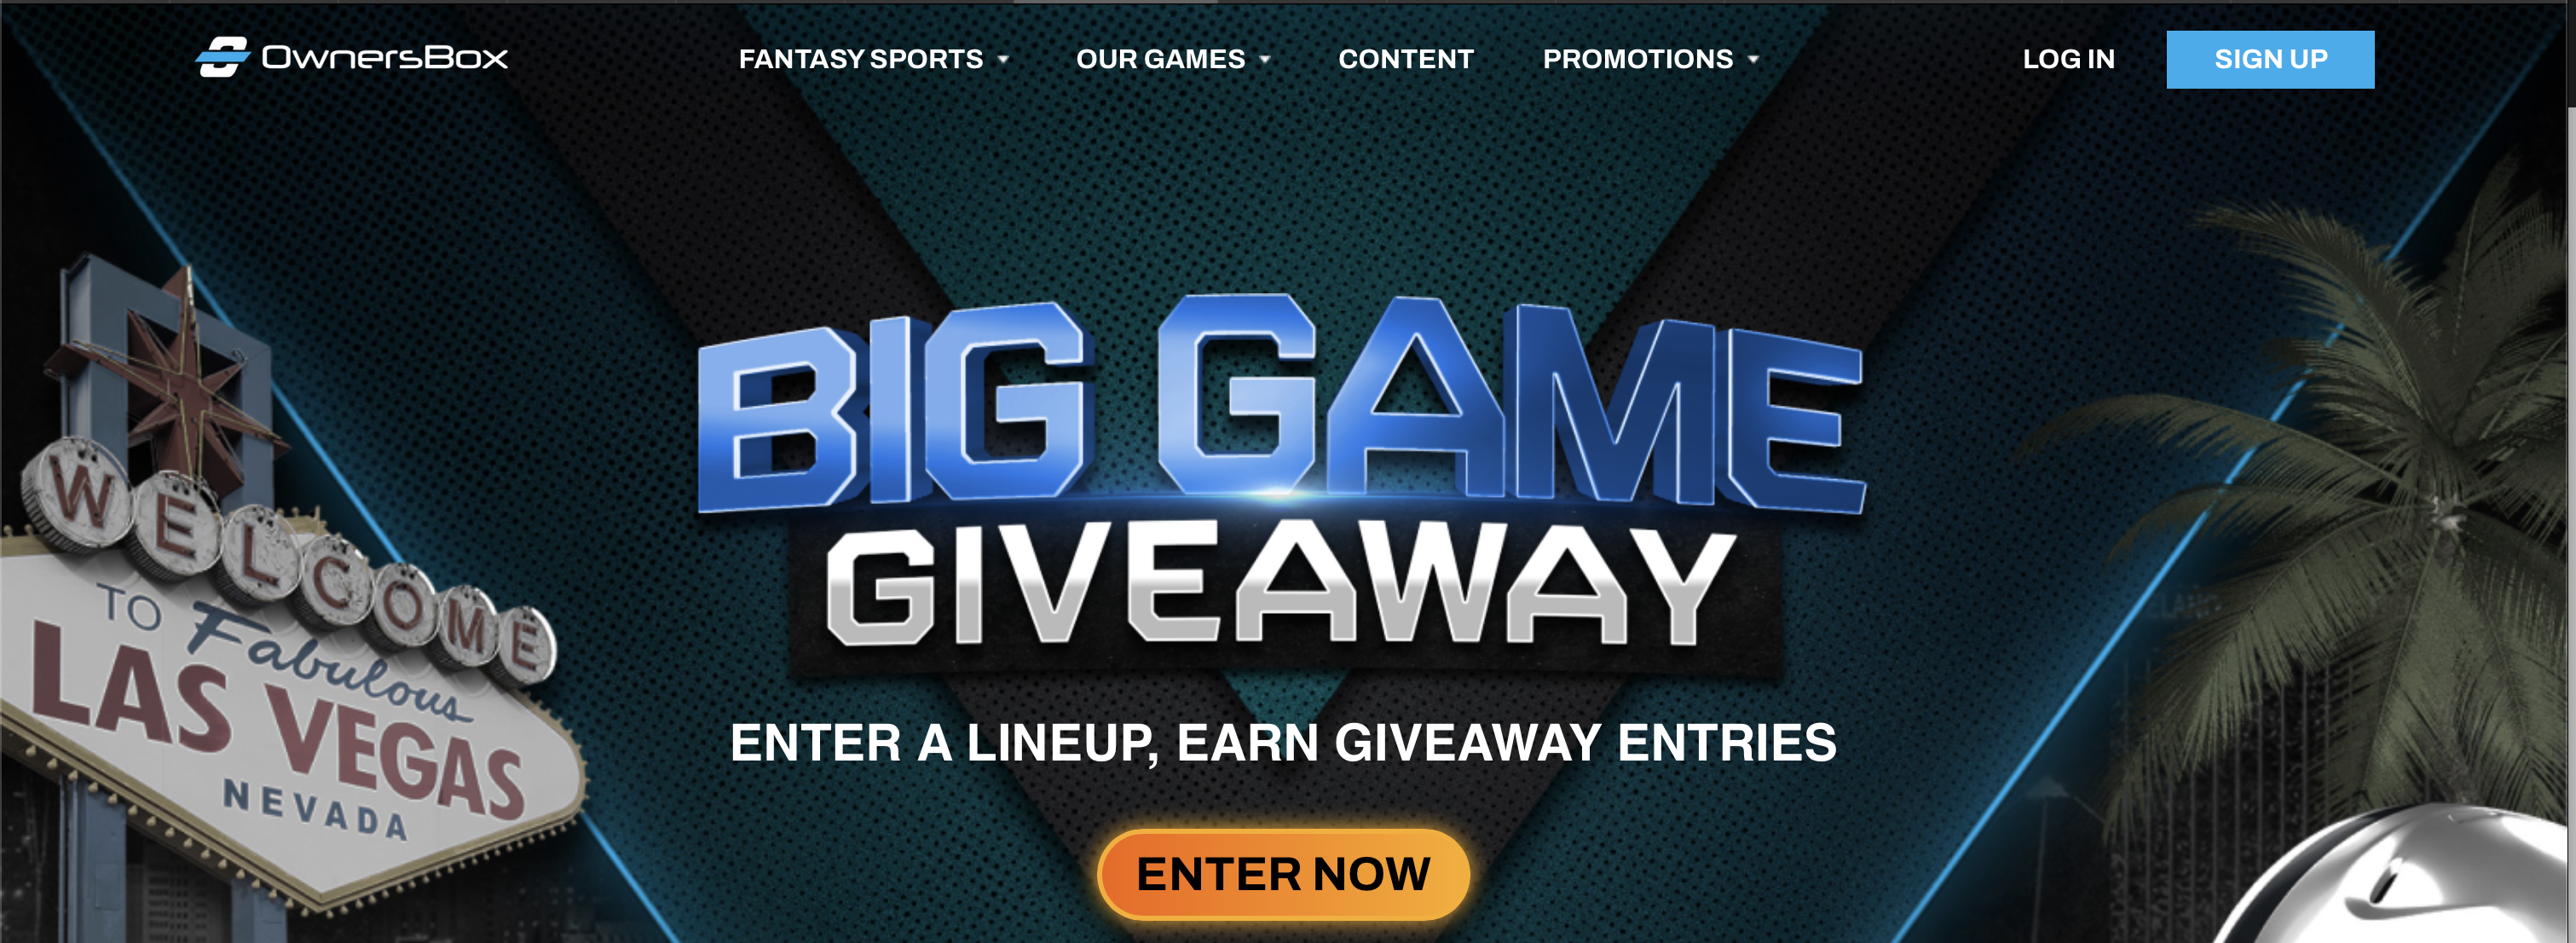 Get ready for the OwnersBox promo code that gives away free Super Bowl tickets